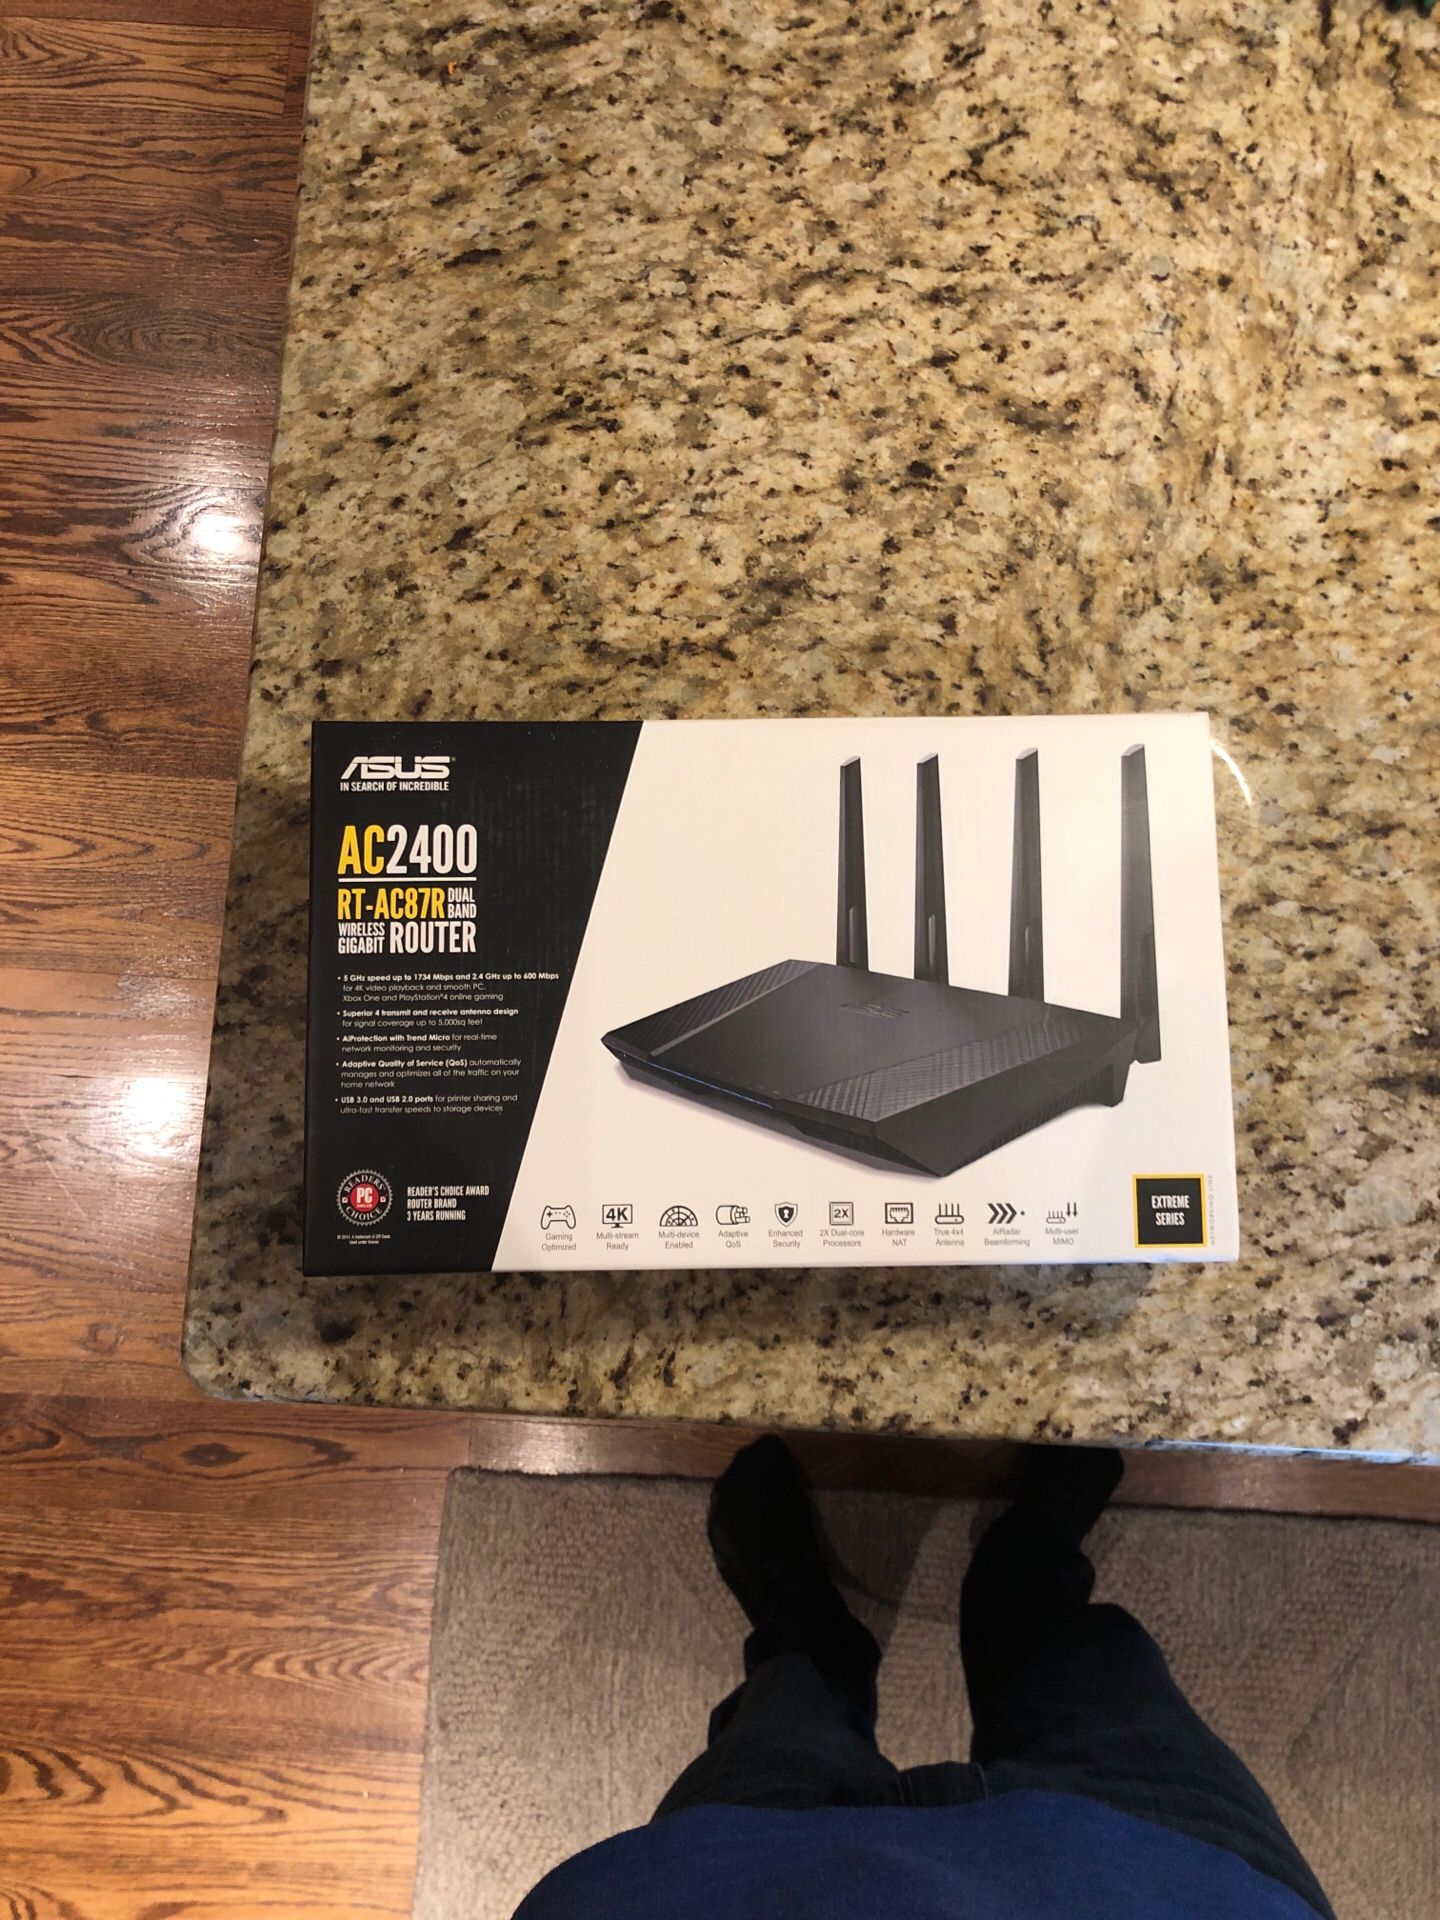 ASUS AC2400 wireless router